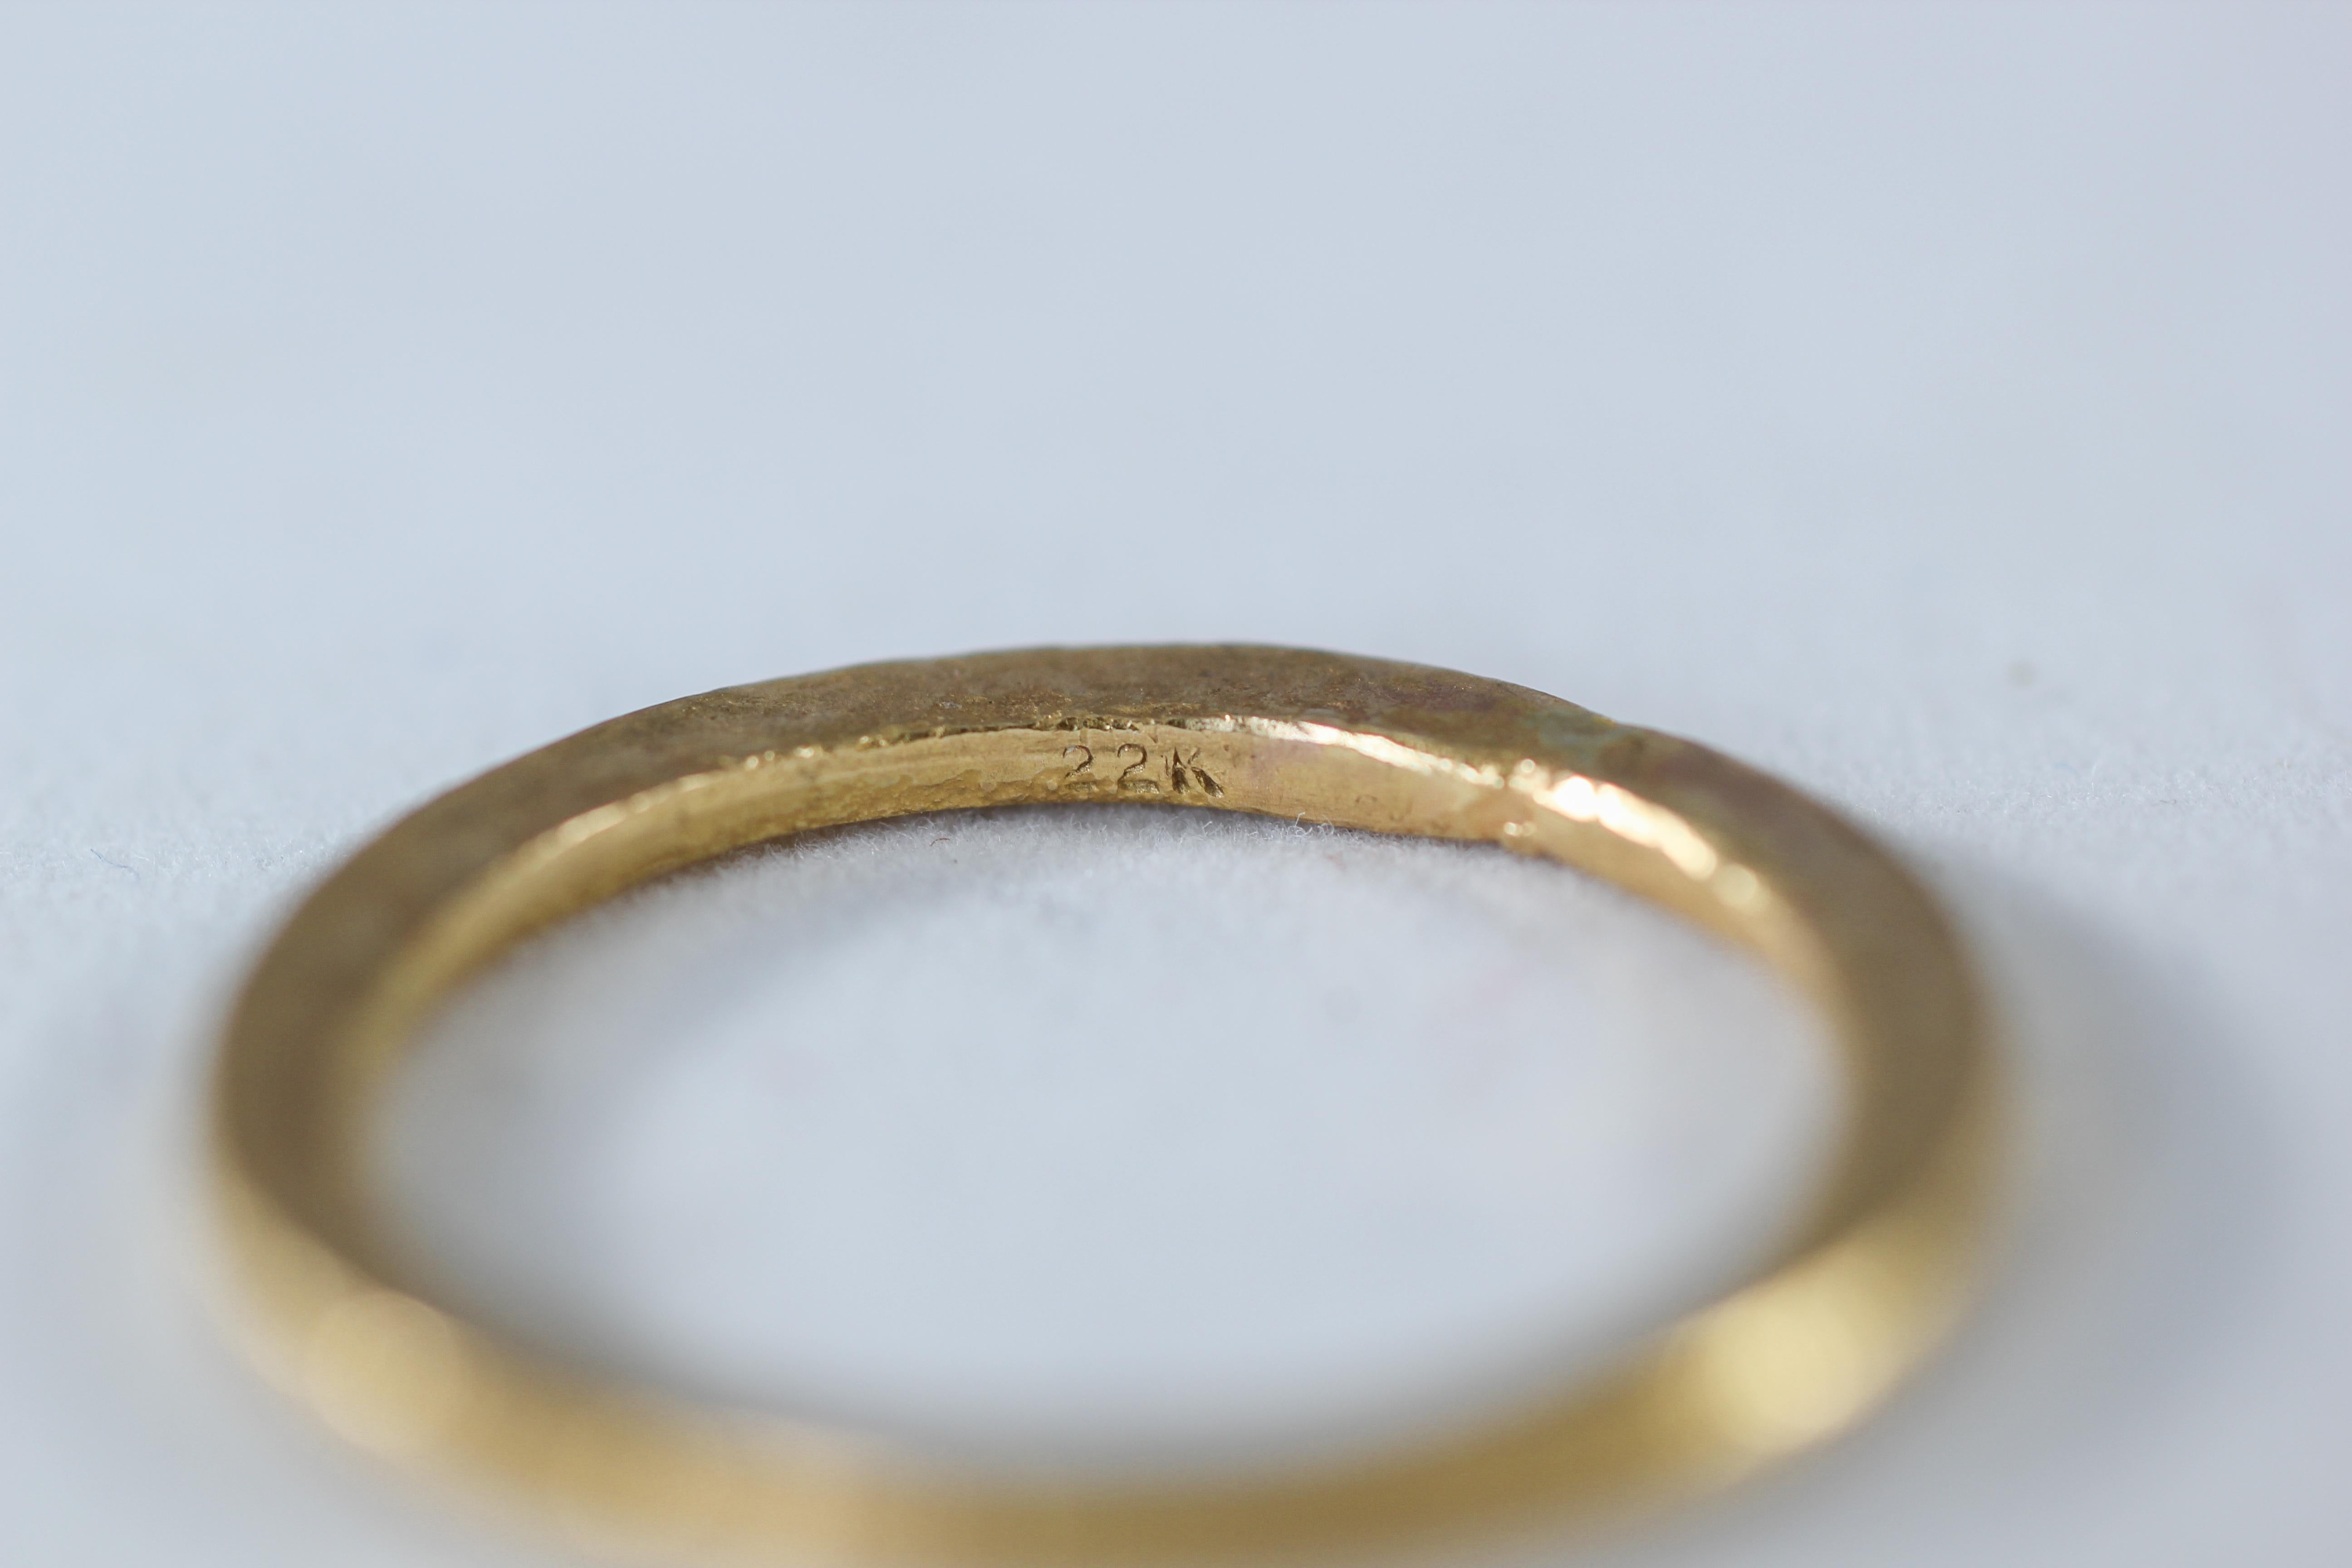 A bridal or wedding band ring in recycled 22k gold. Simplicity Medium Disk contemporary unisex wedding band ring is designed and handcrafted by AB Jewelry NYC. Unisex, Ideal for a man or a woman. Wear it alone or as a fashionable stacking ring